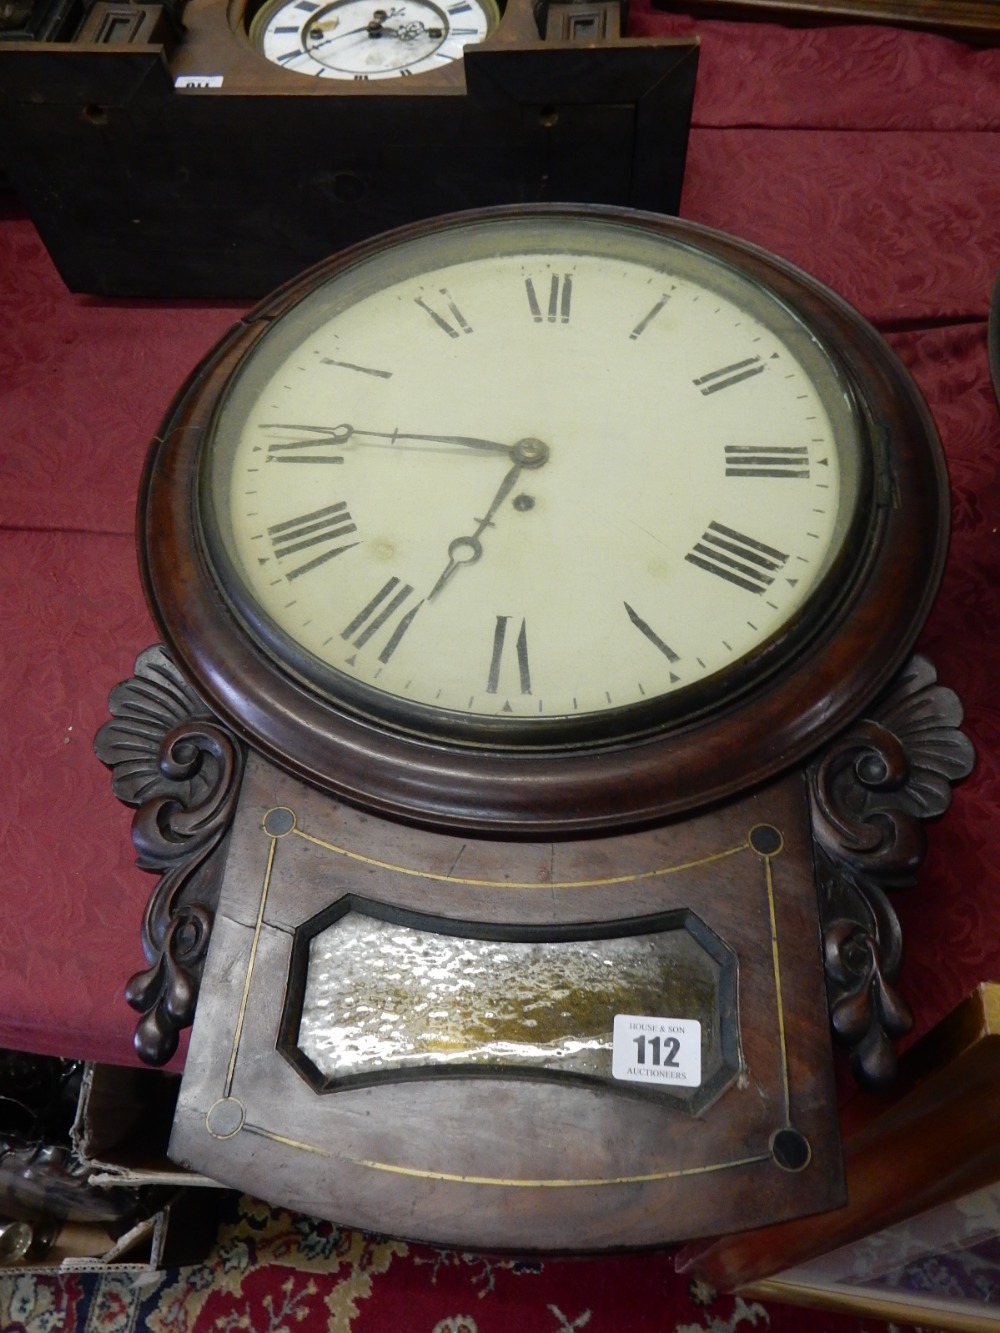 A 19th Century wall clock with cream enamel dial, in a mahogany and brass inlaid case - 21in. long